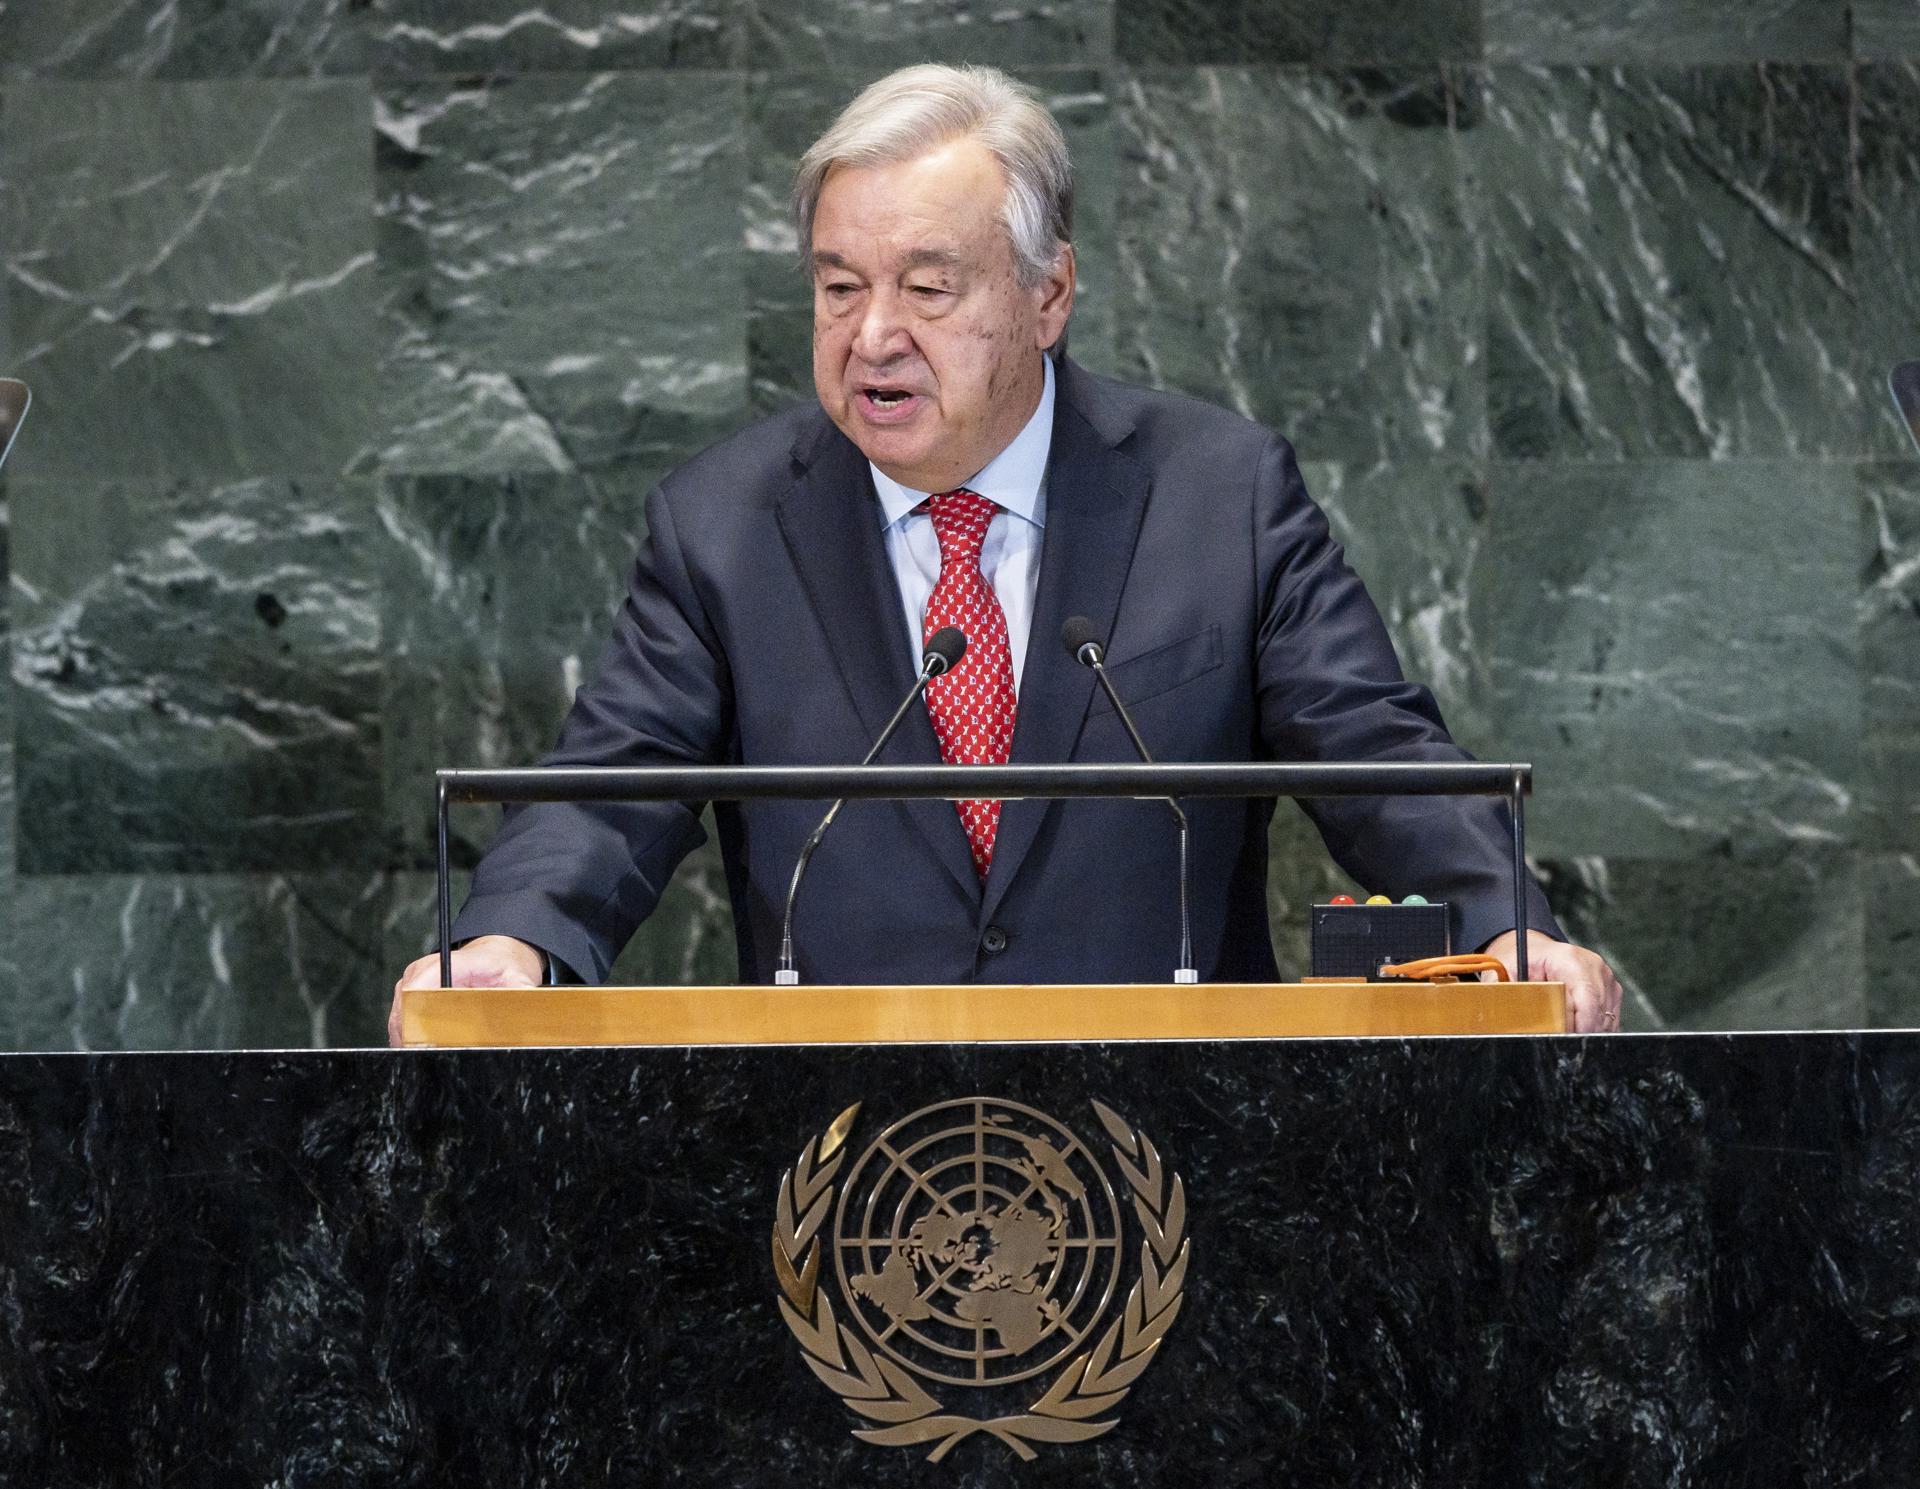 Guterres sees planet objectives as a fight against inequality